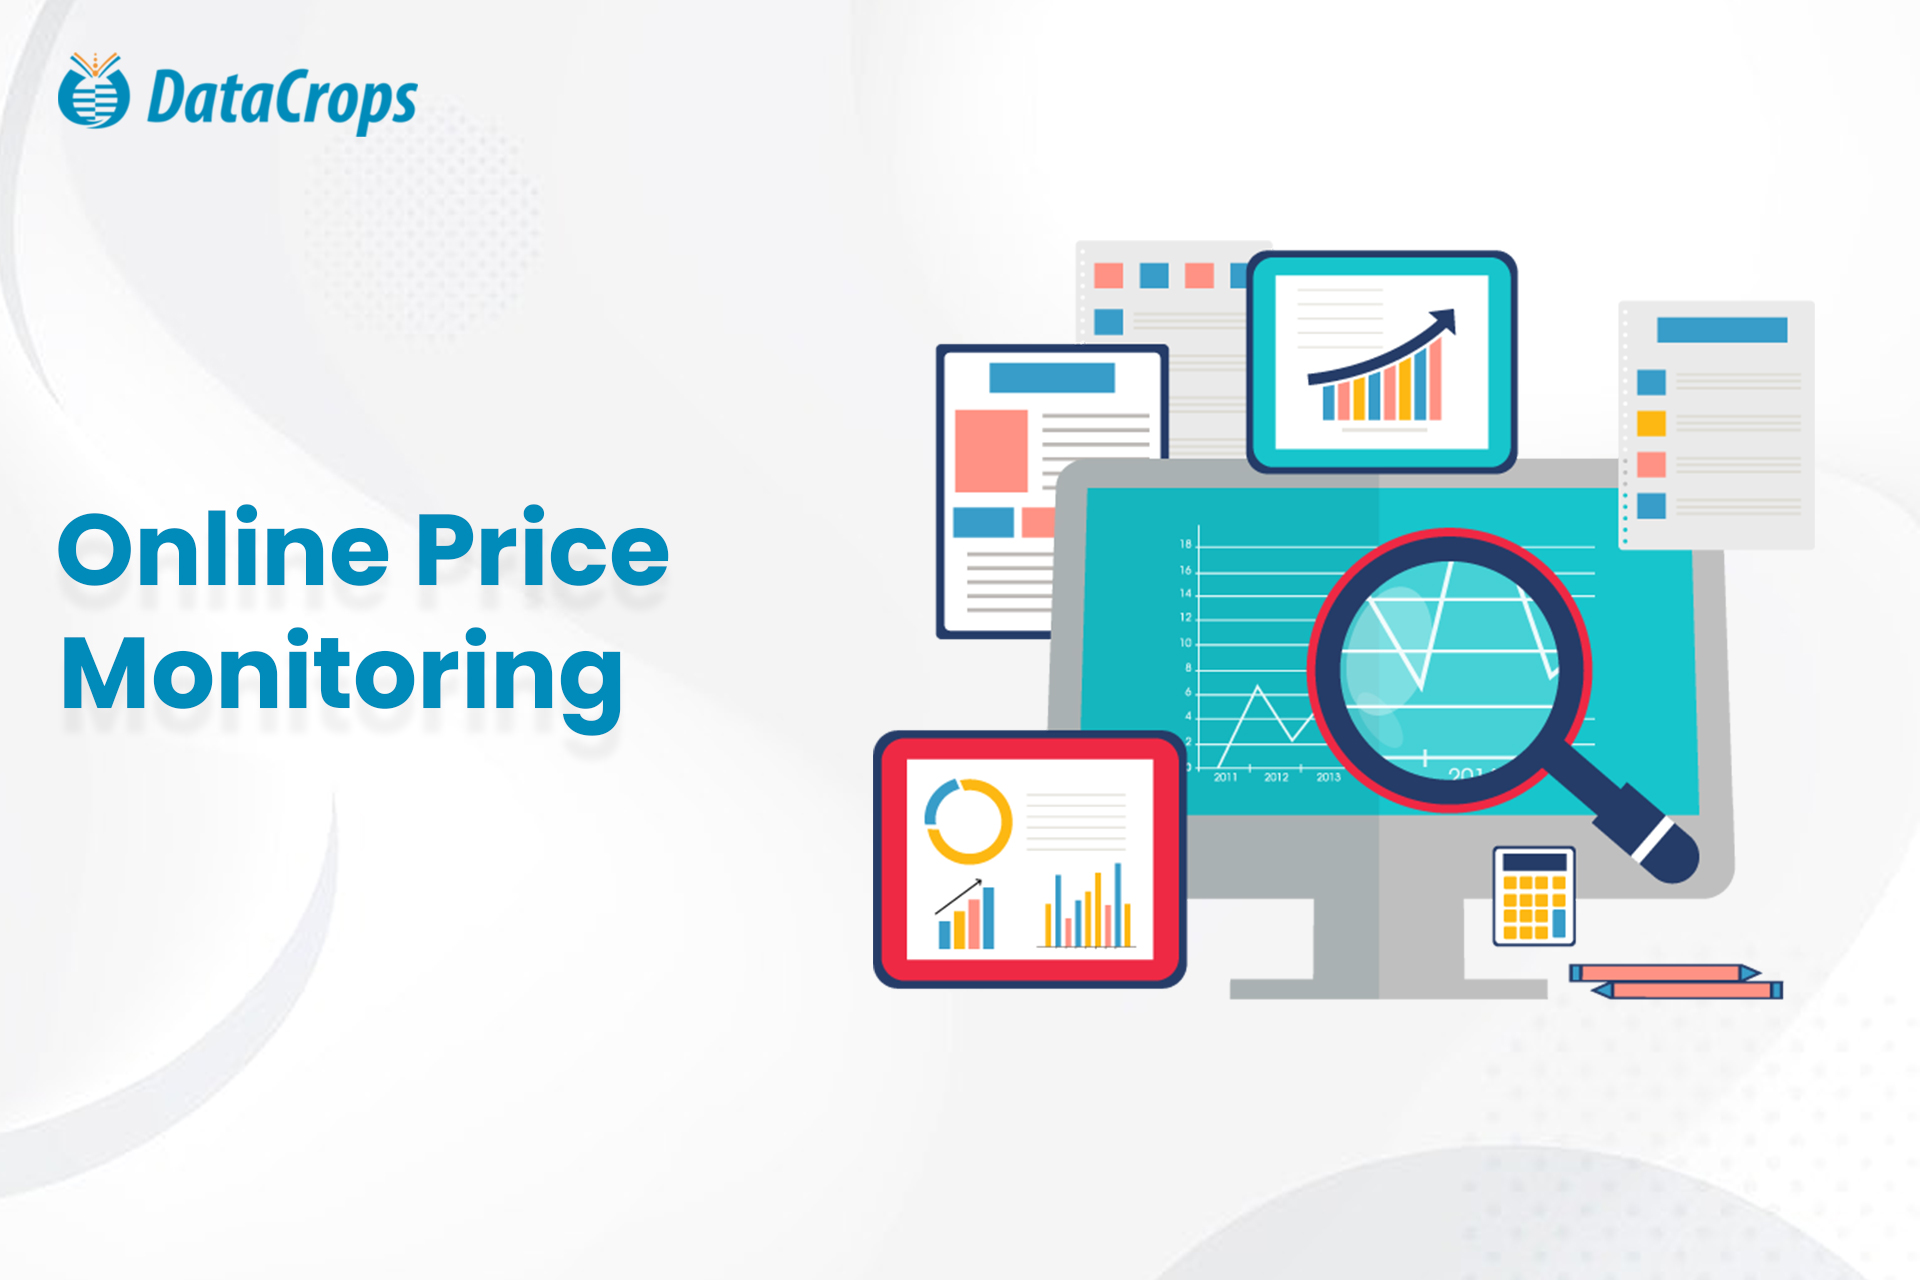 Competitor price monitoring software